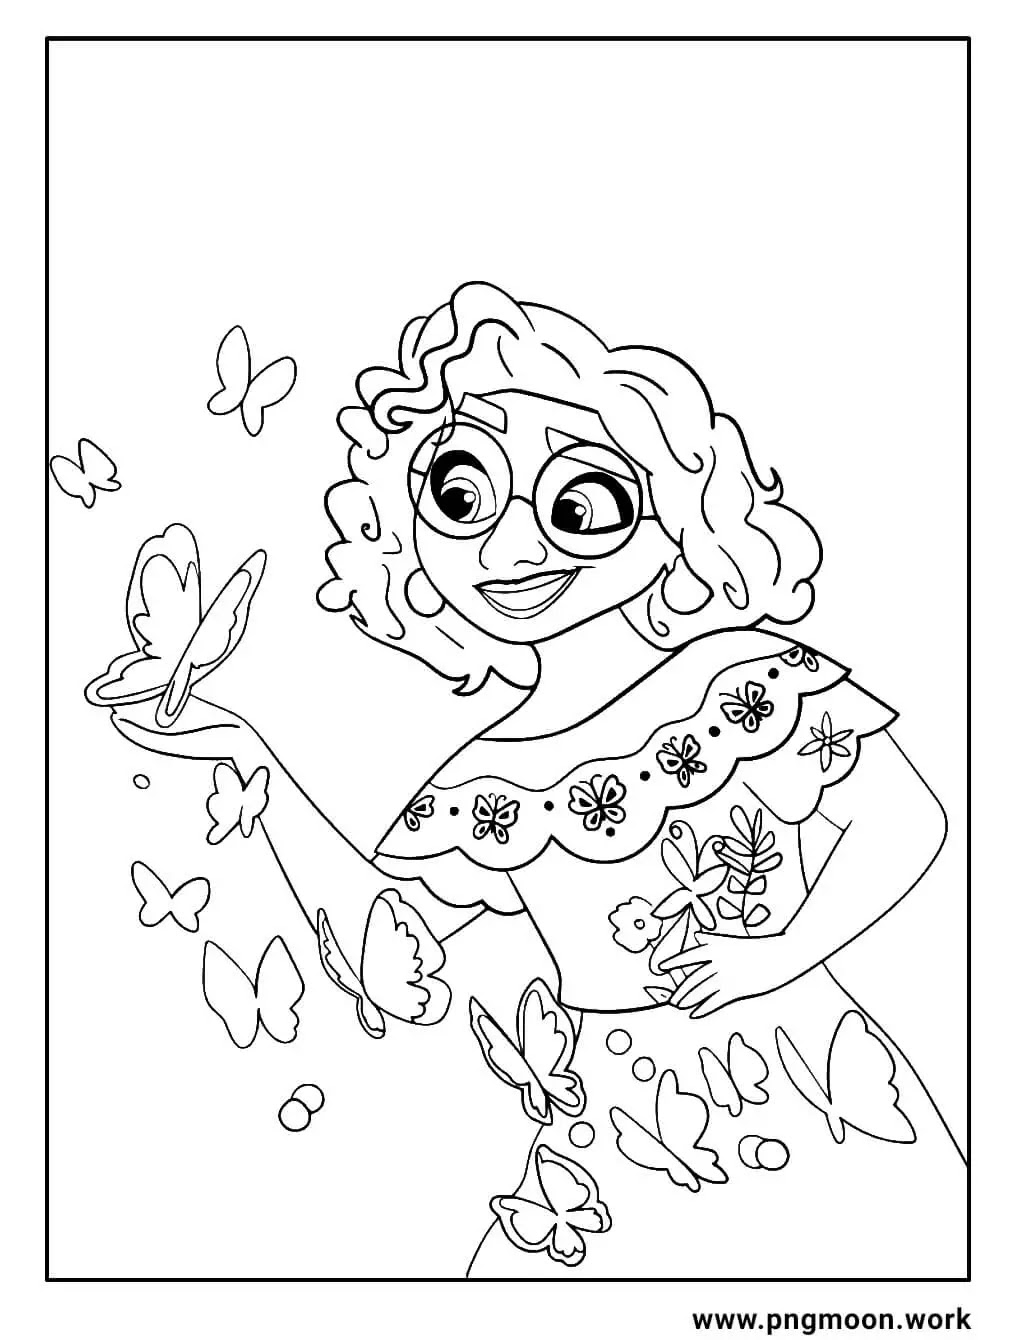 Encanto Coloring Pages - Pngmoon- PNG images, Coloring Pages